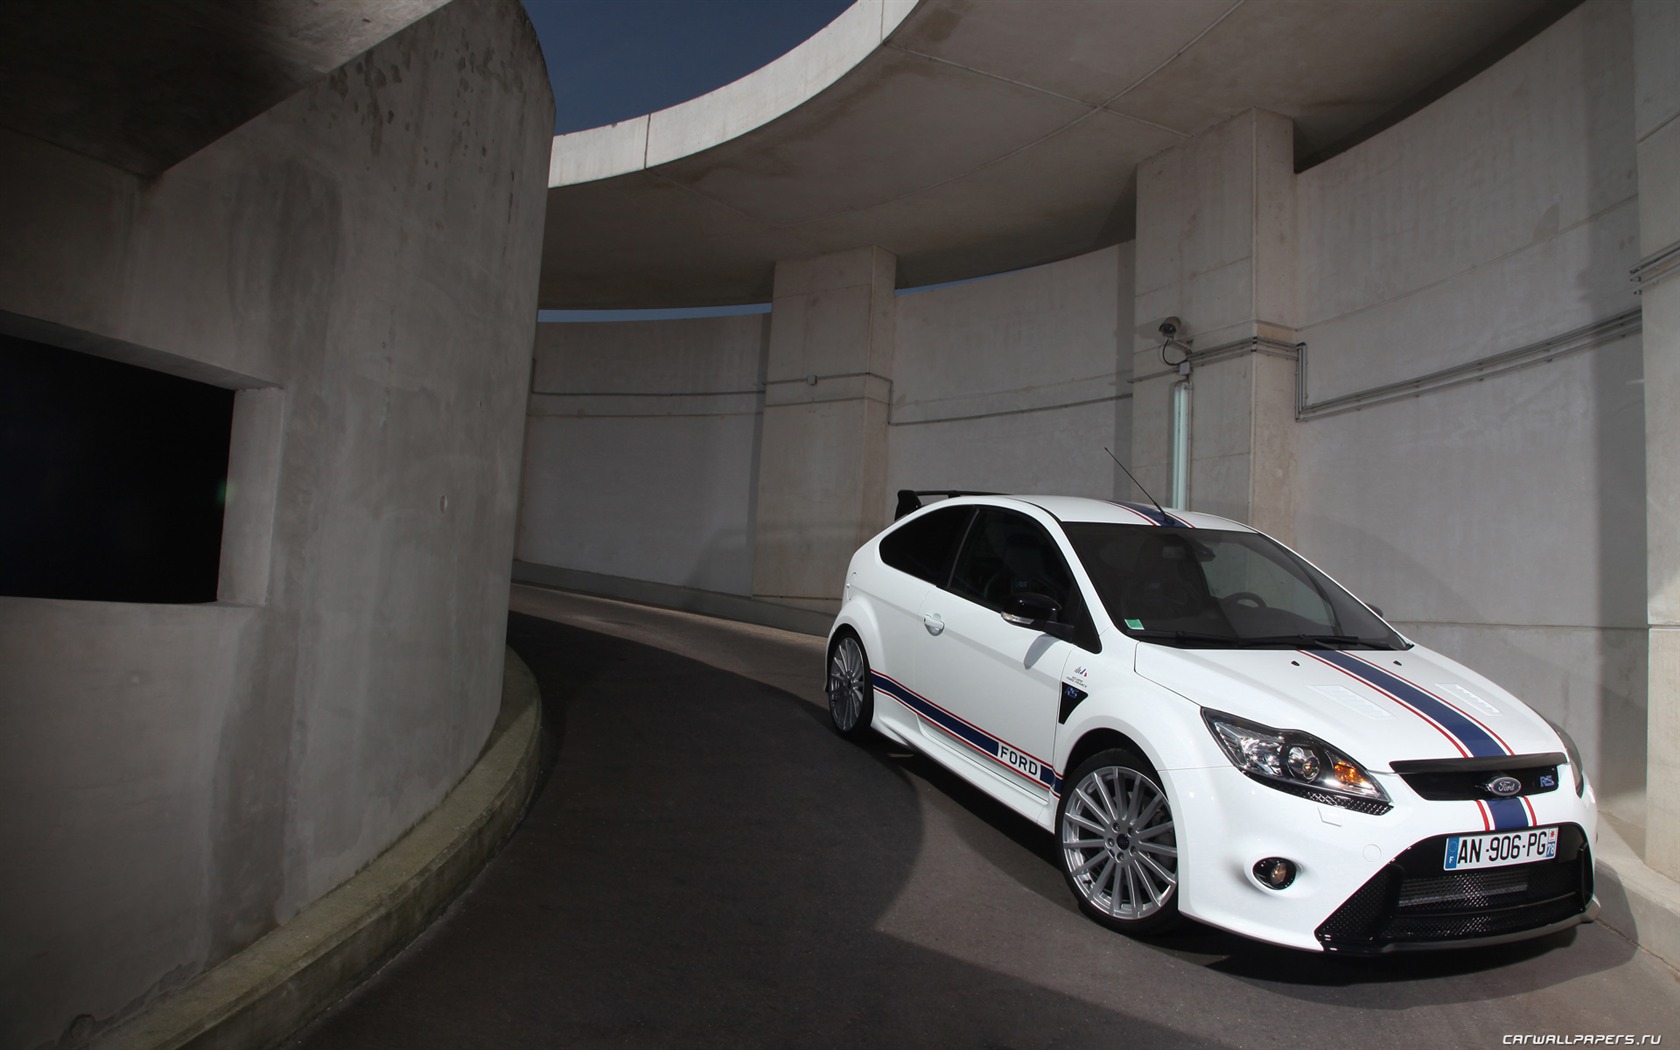 Ford Focus RS Le Mans Classic - 2010 福特7 - 1680x1050